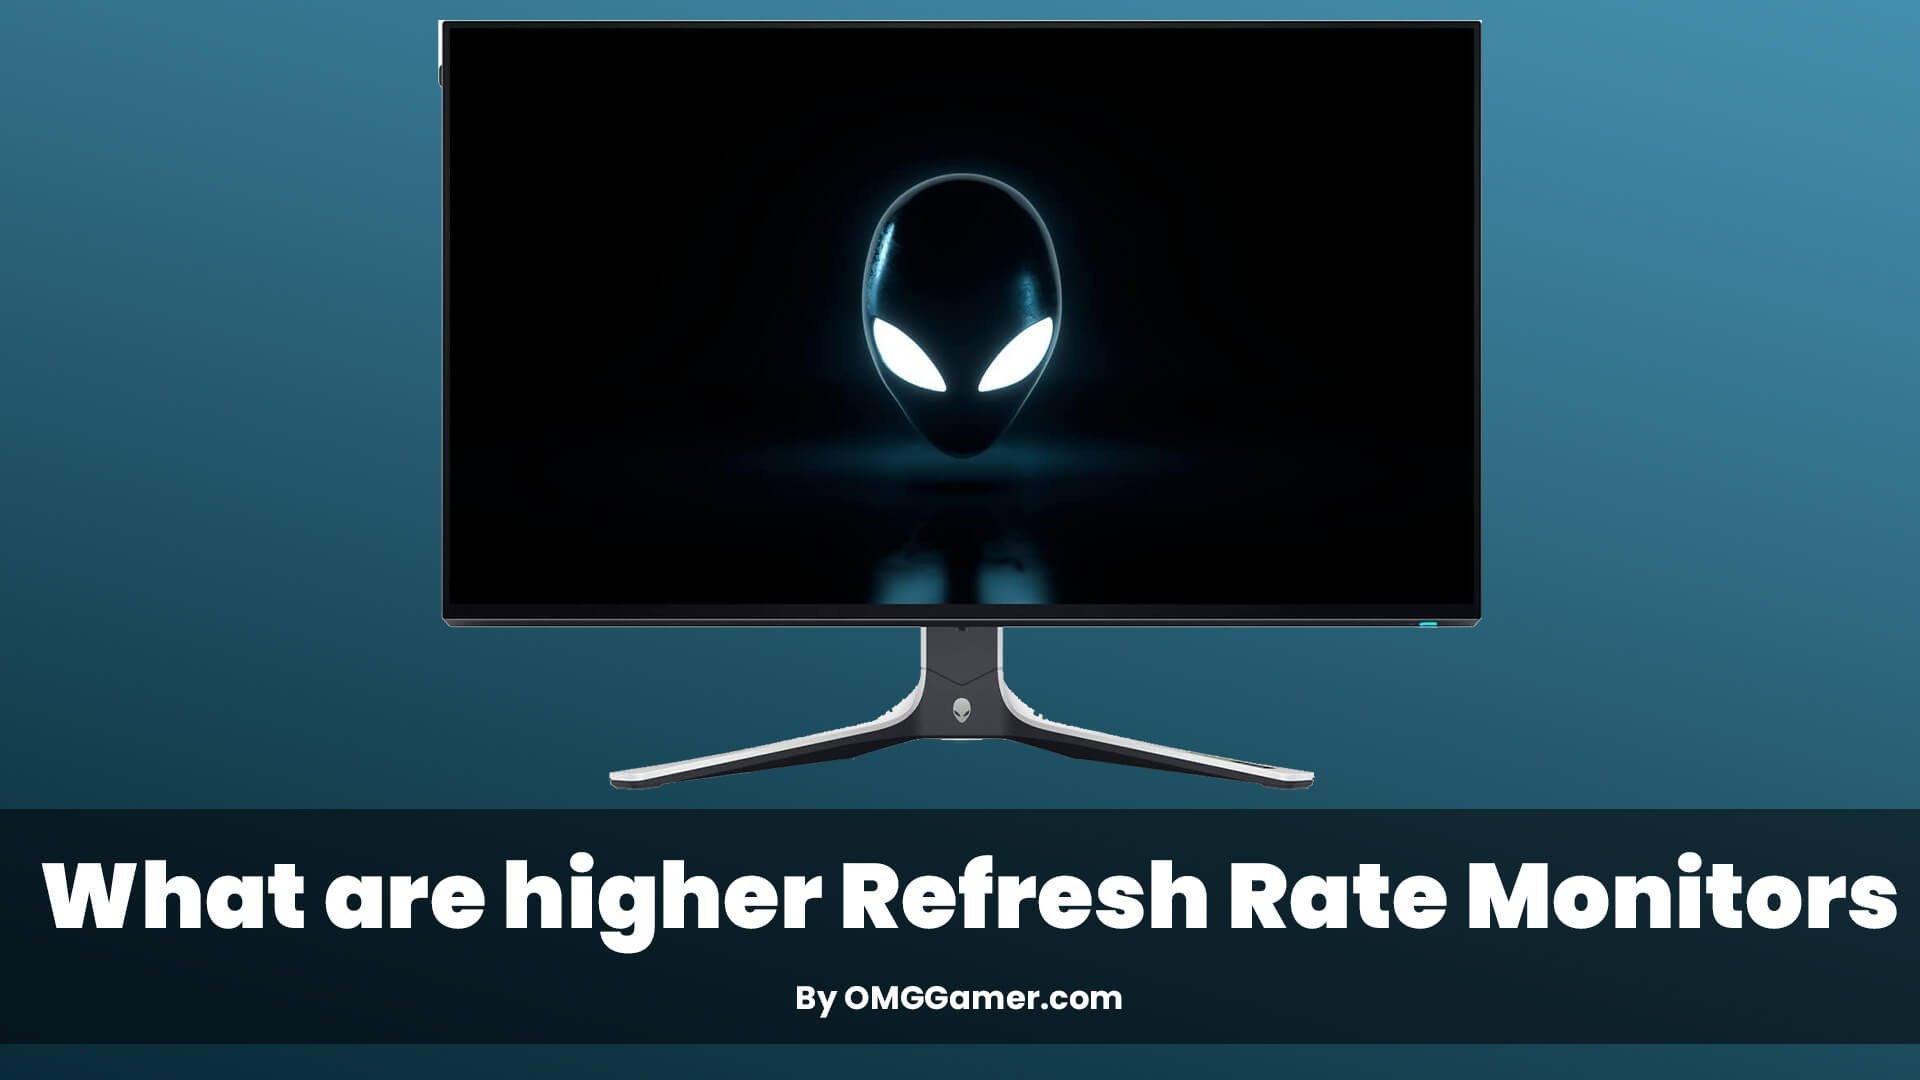 What are higher Refresh Rate Monitors